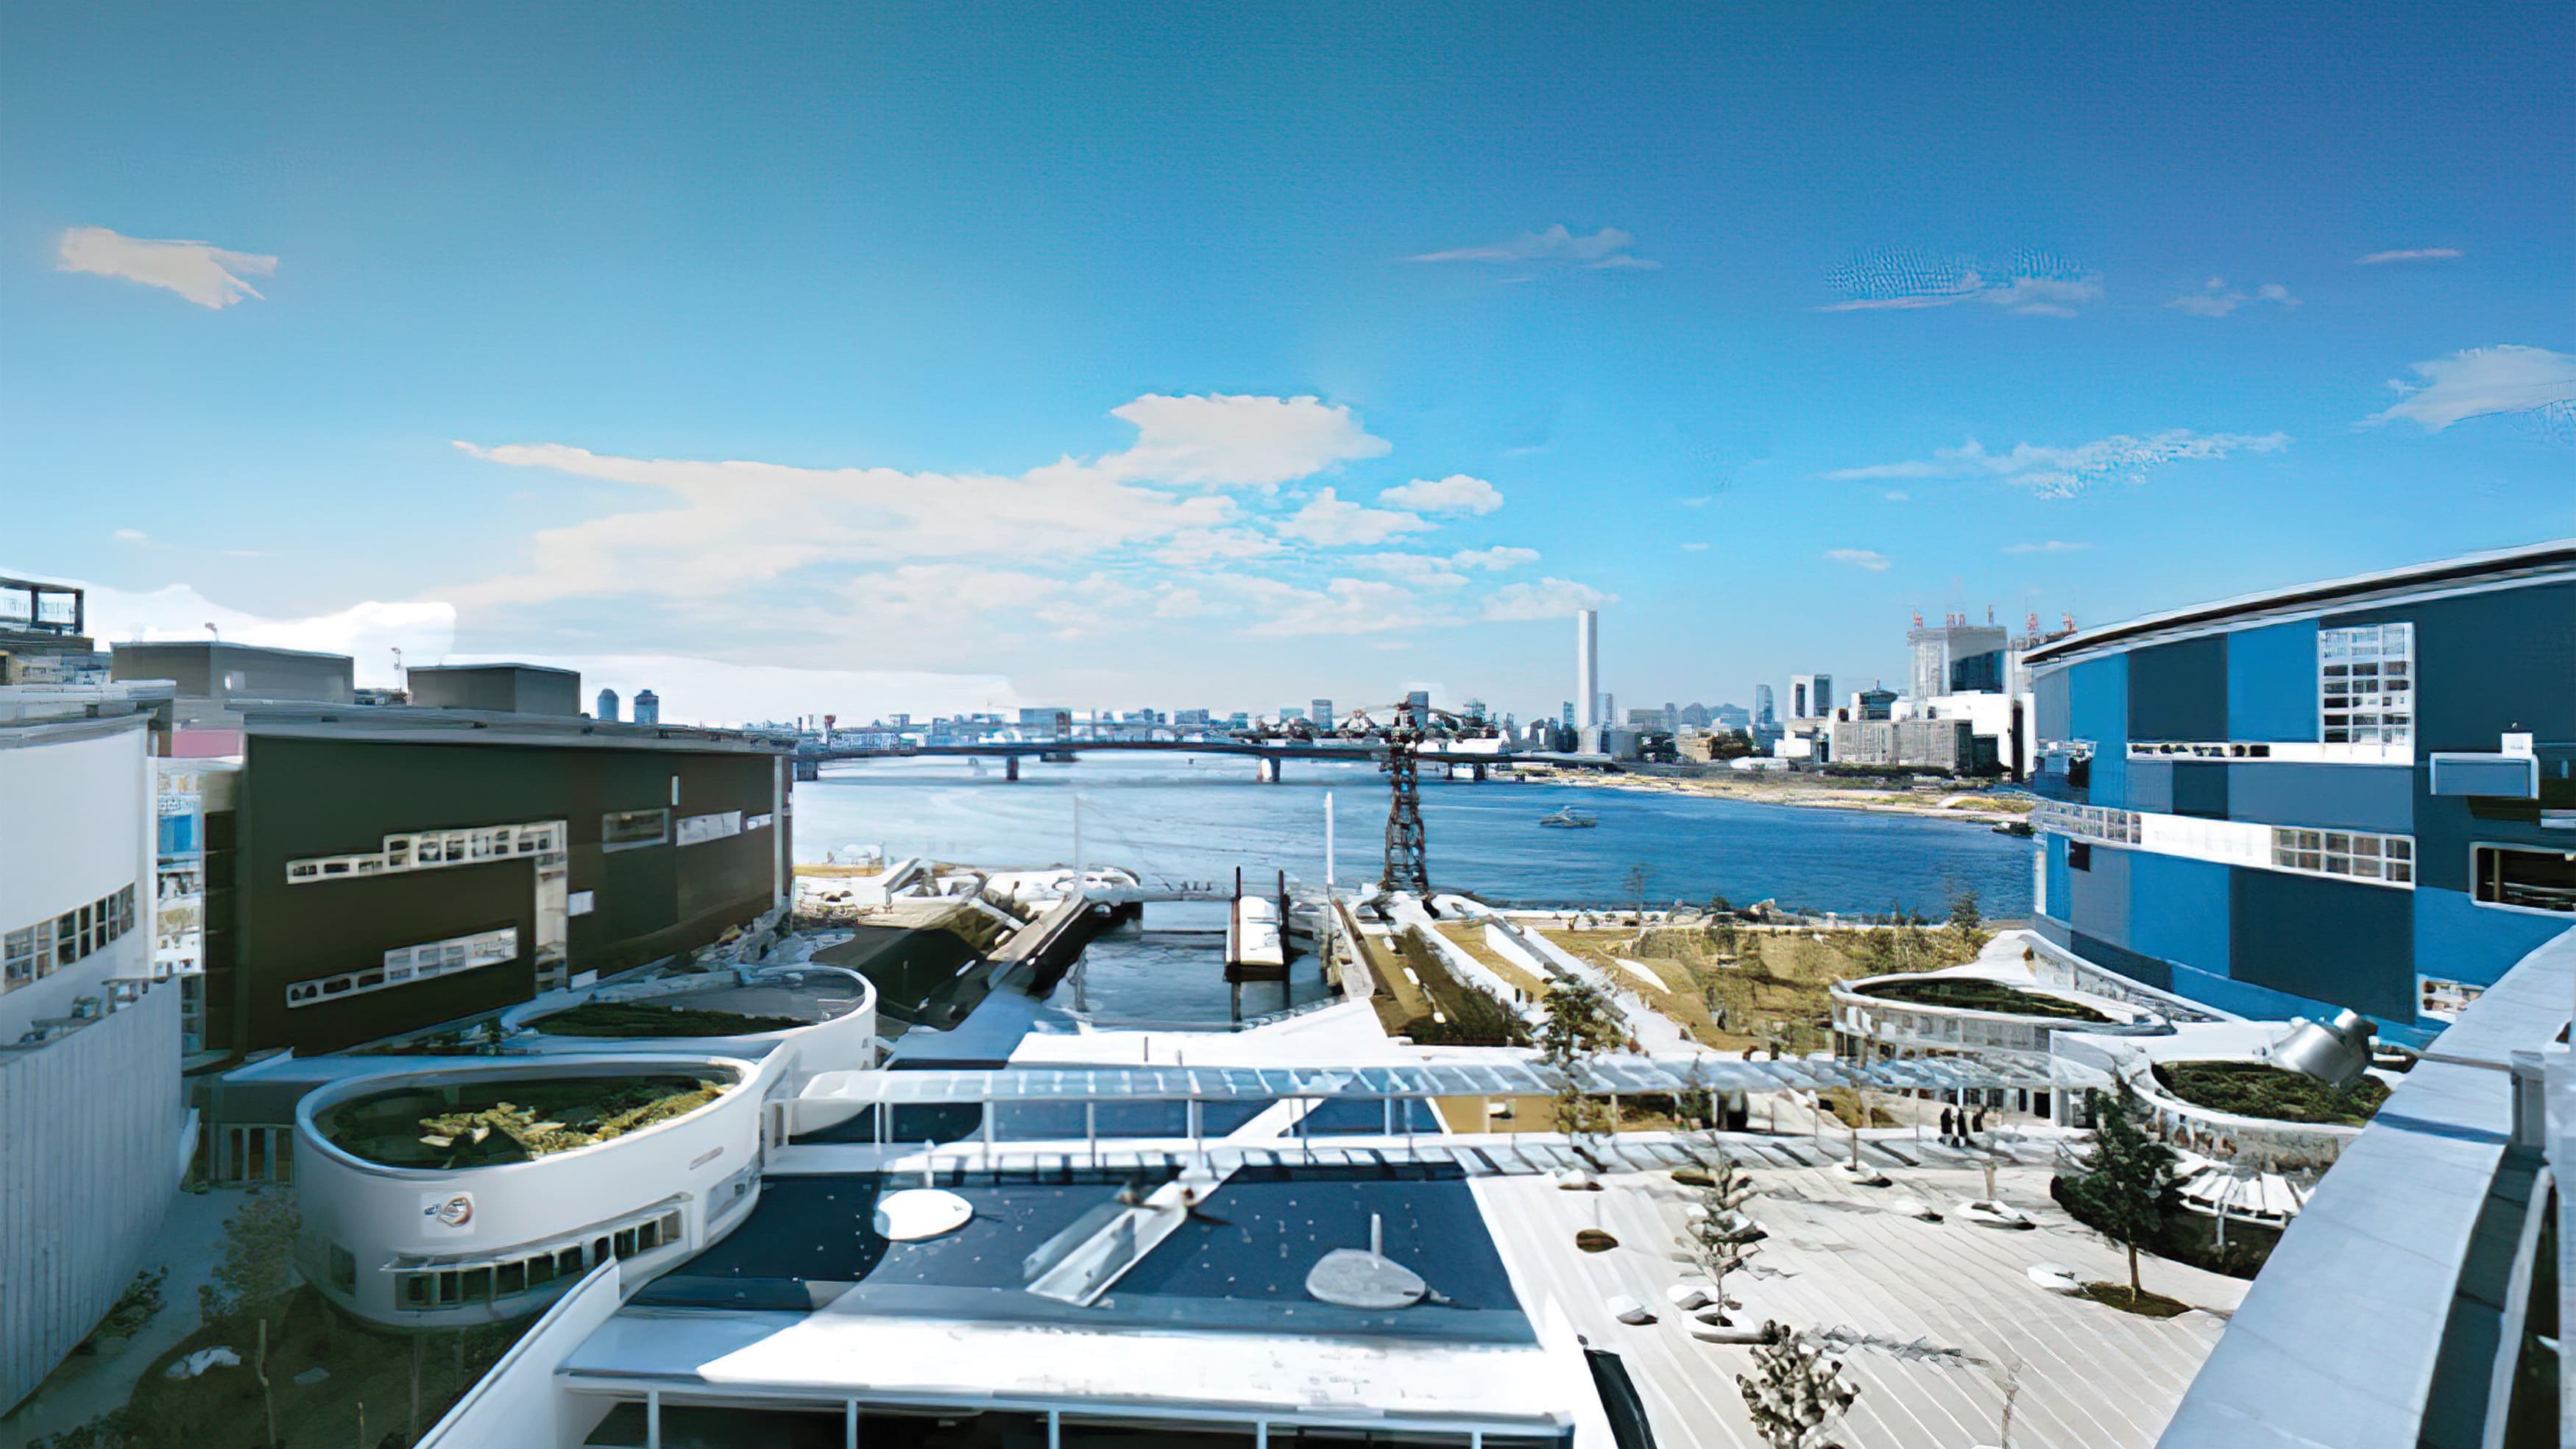 A photograph of the Lalaport Toyosu's modern architecture